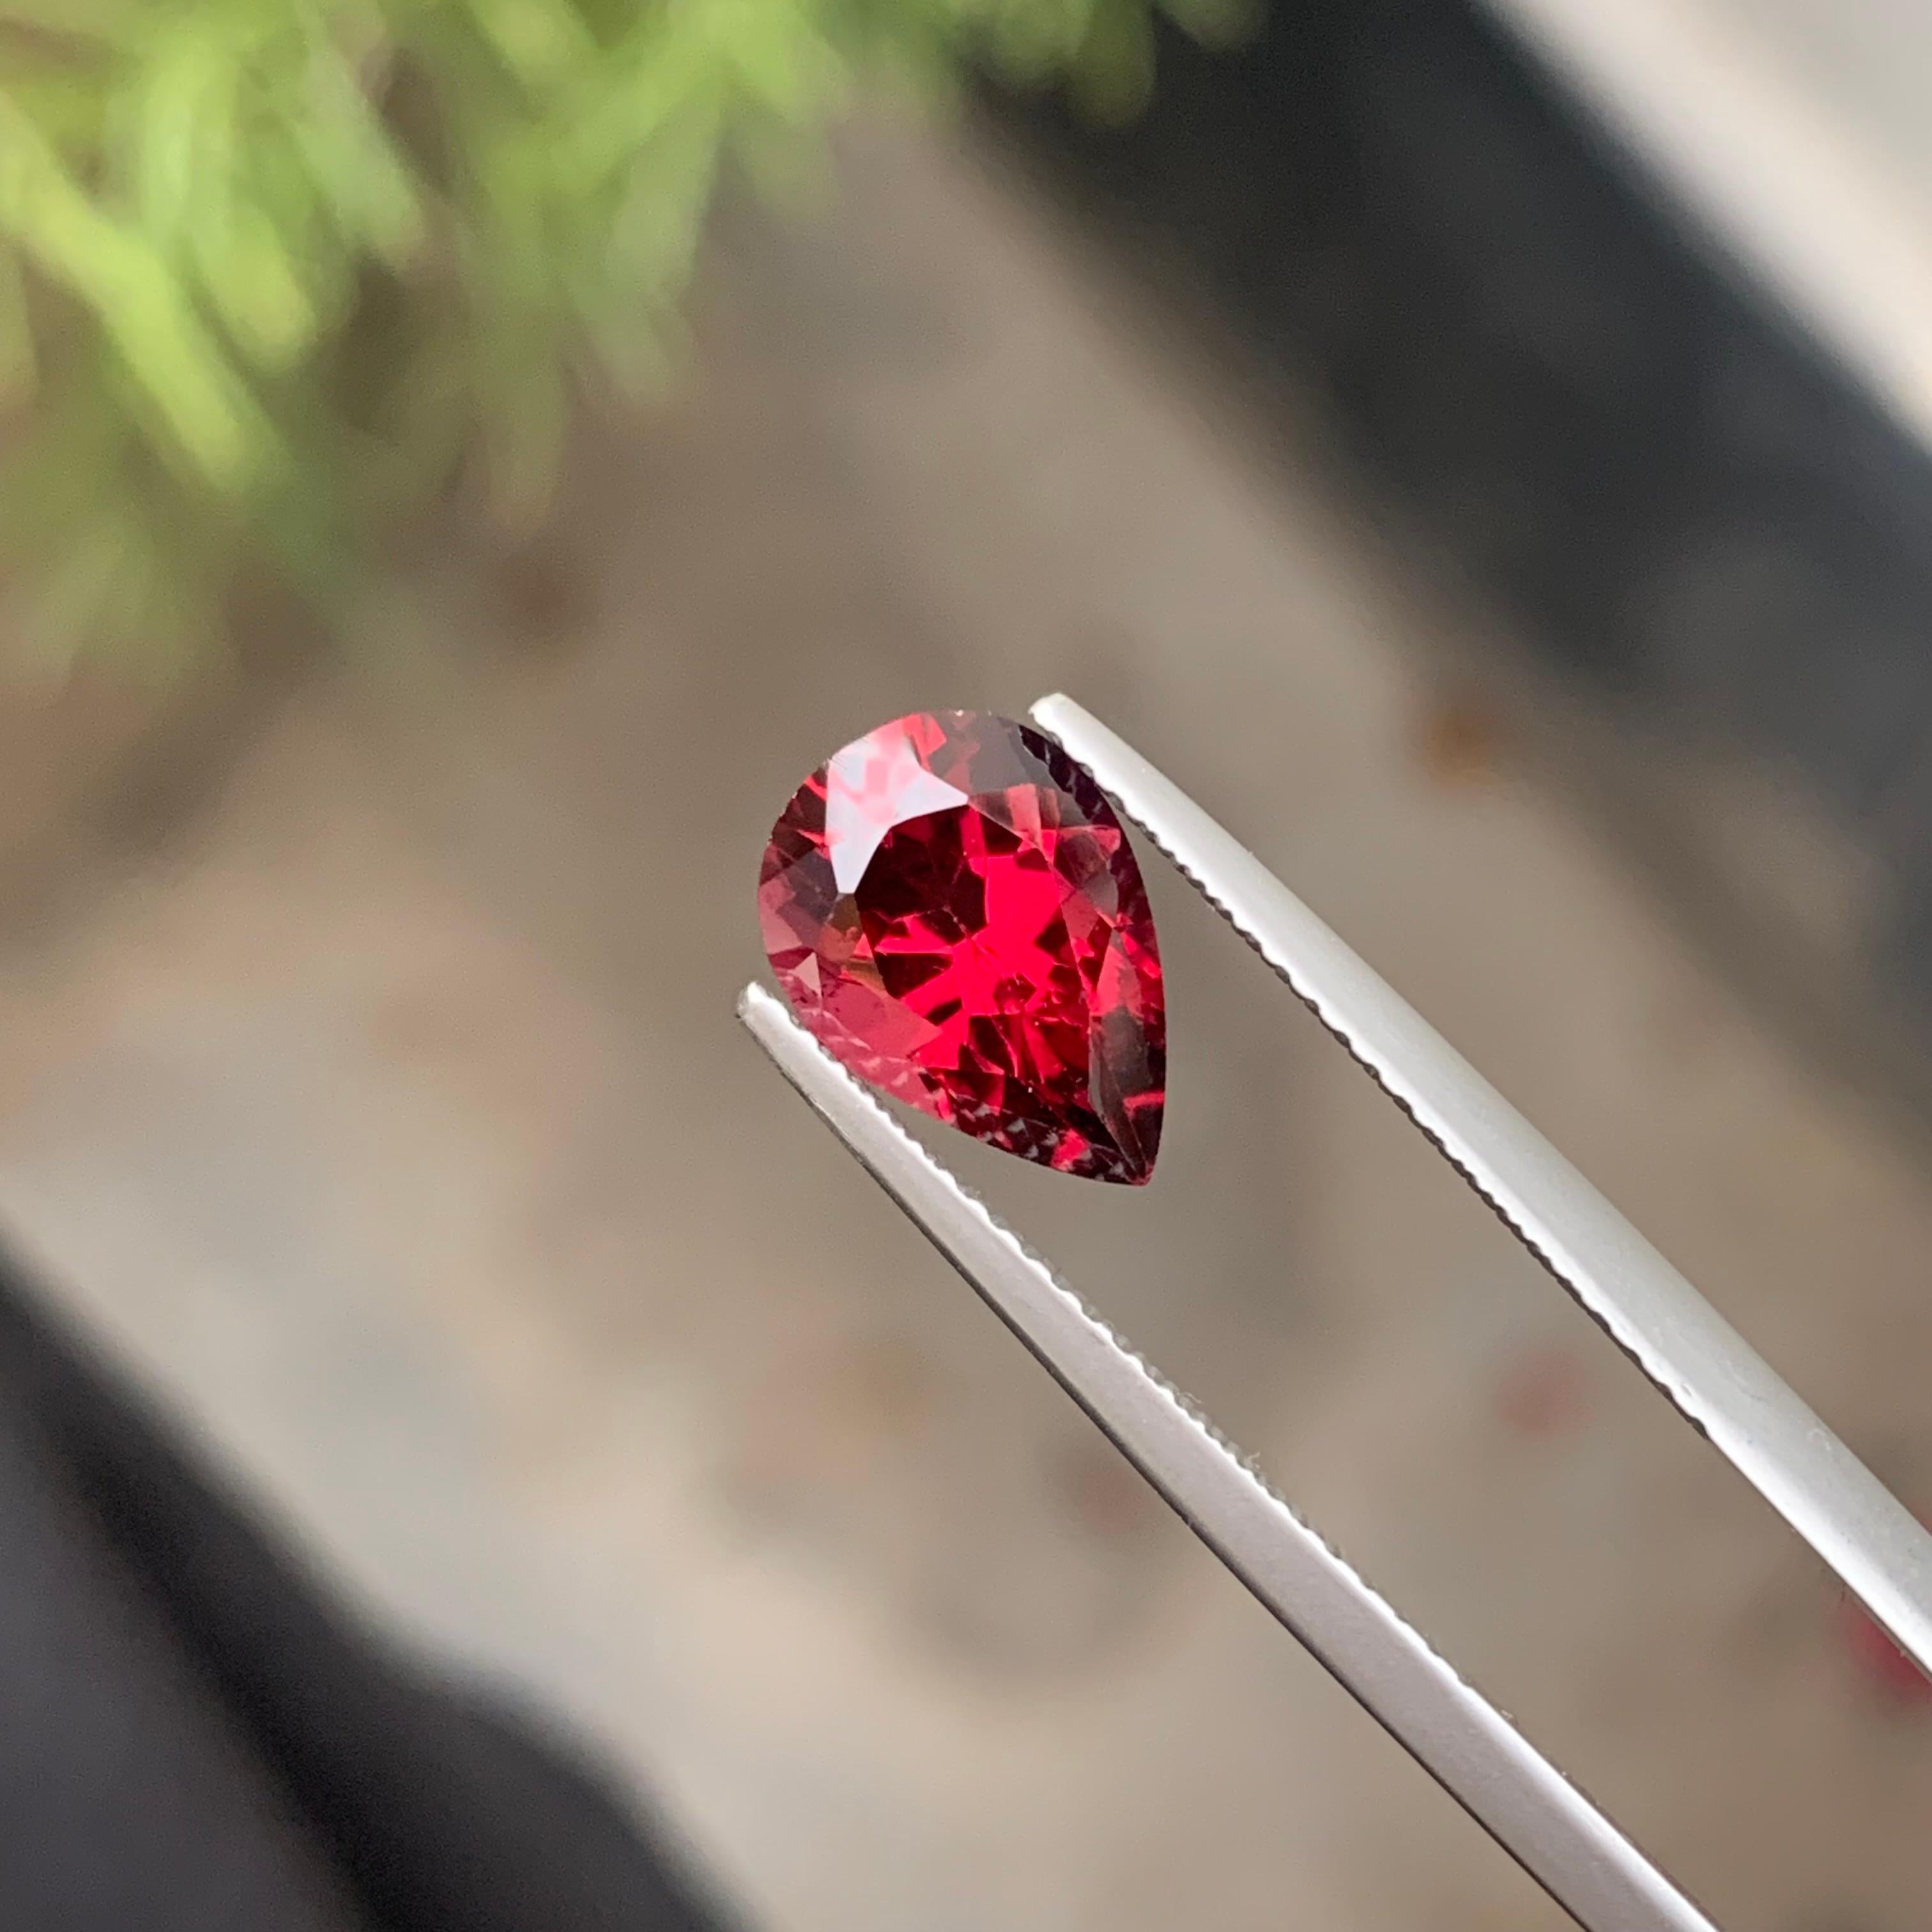 Faceted Rhodolite Garnet
Weight: 2.85 Carats Both
Dimension: 10.5x7.4x5.5 Mm
Origin: Madagascar Africa
Color: Red
Treatment: Non
Shape: Pear
Cut: Fancy
The Rhodolite resembles pomegranate seeds, since both are eternal both are love symbols. This